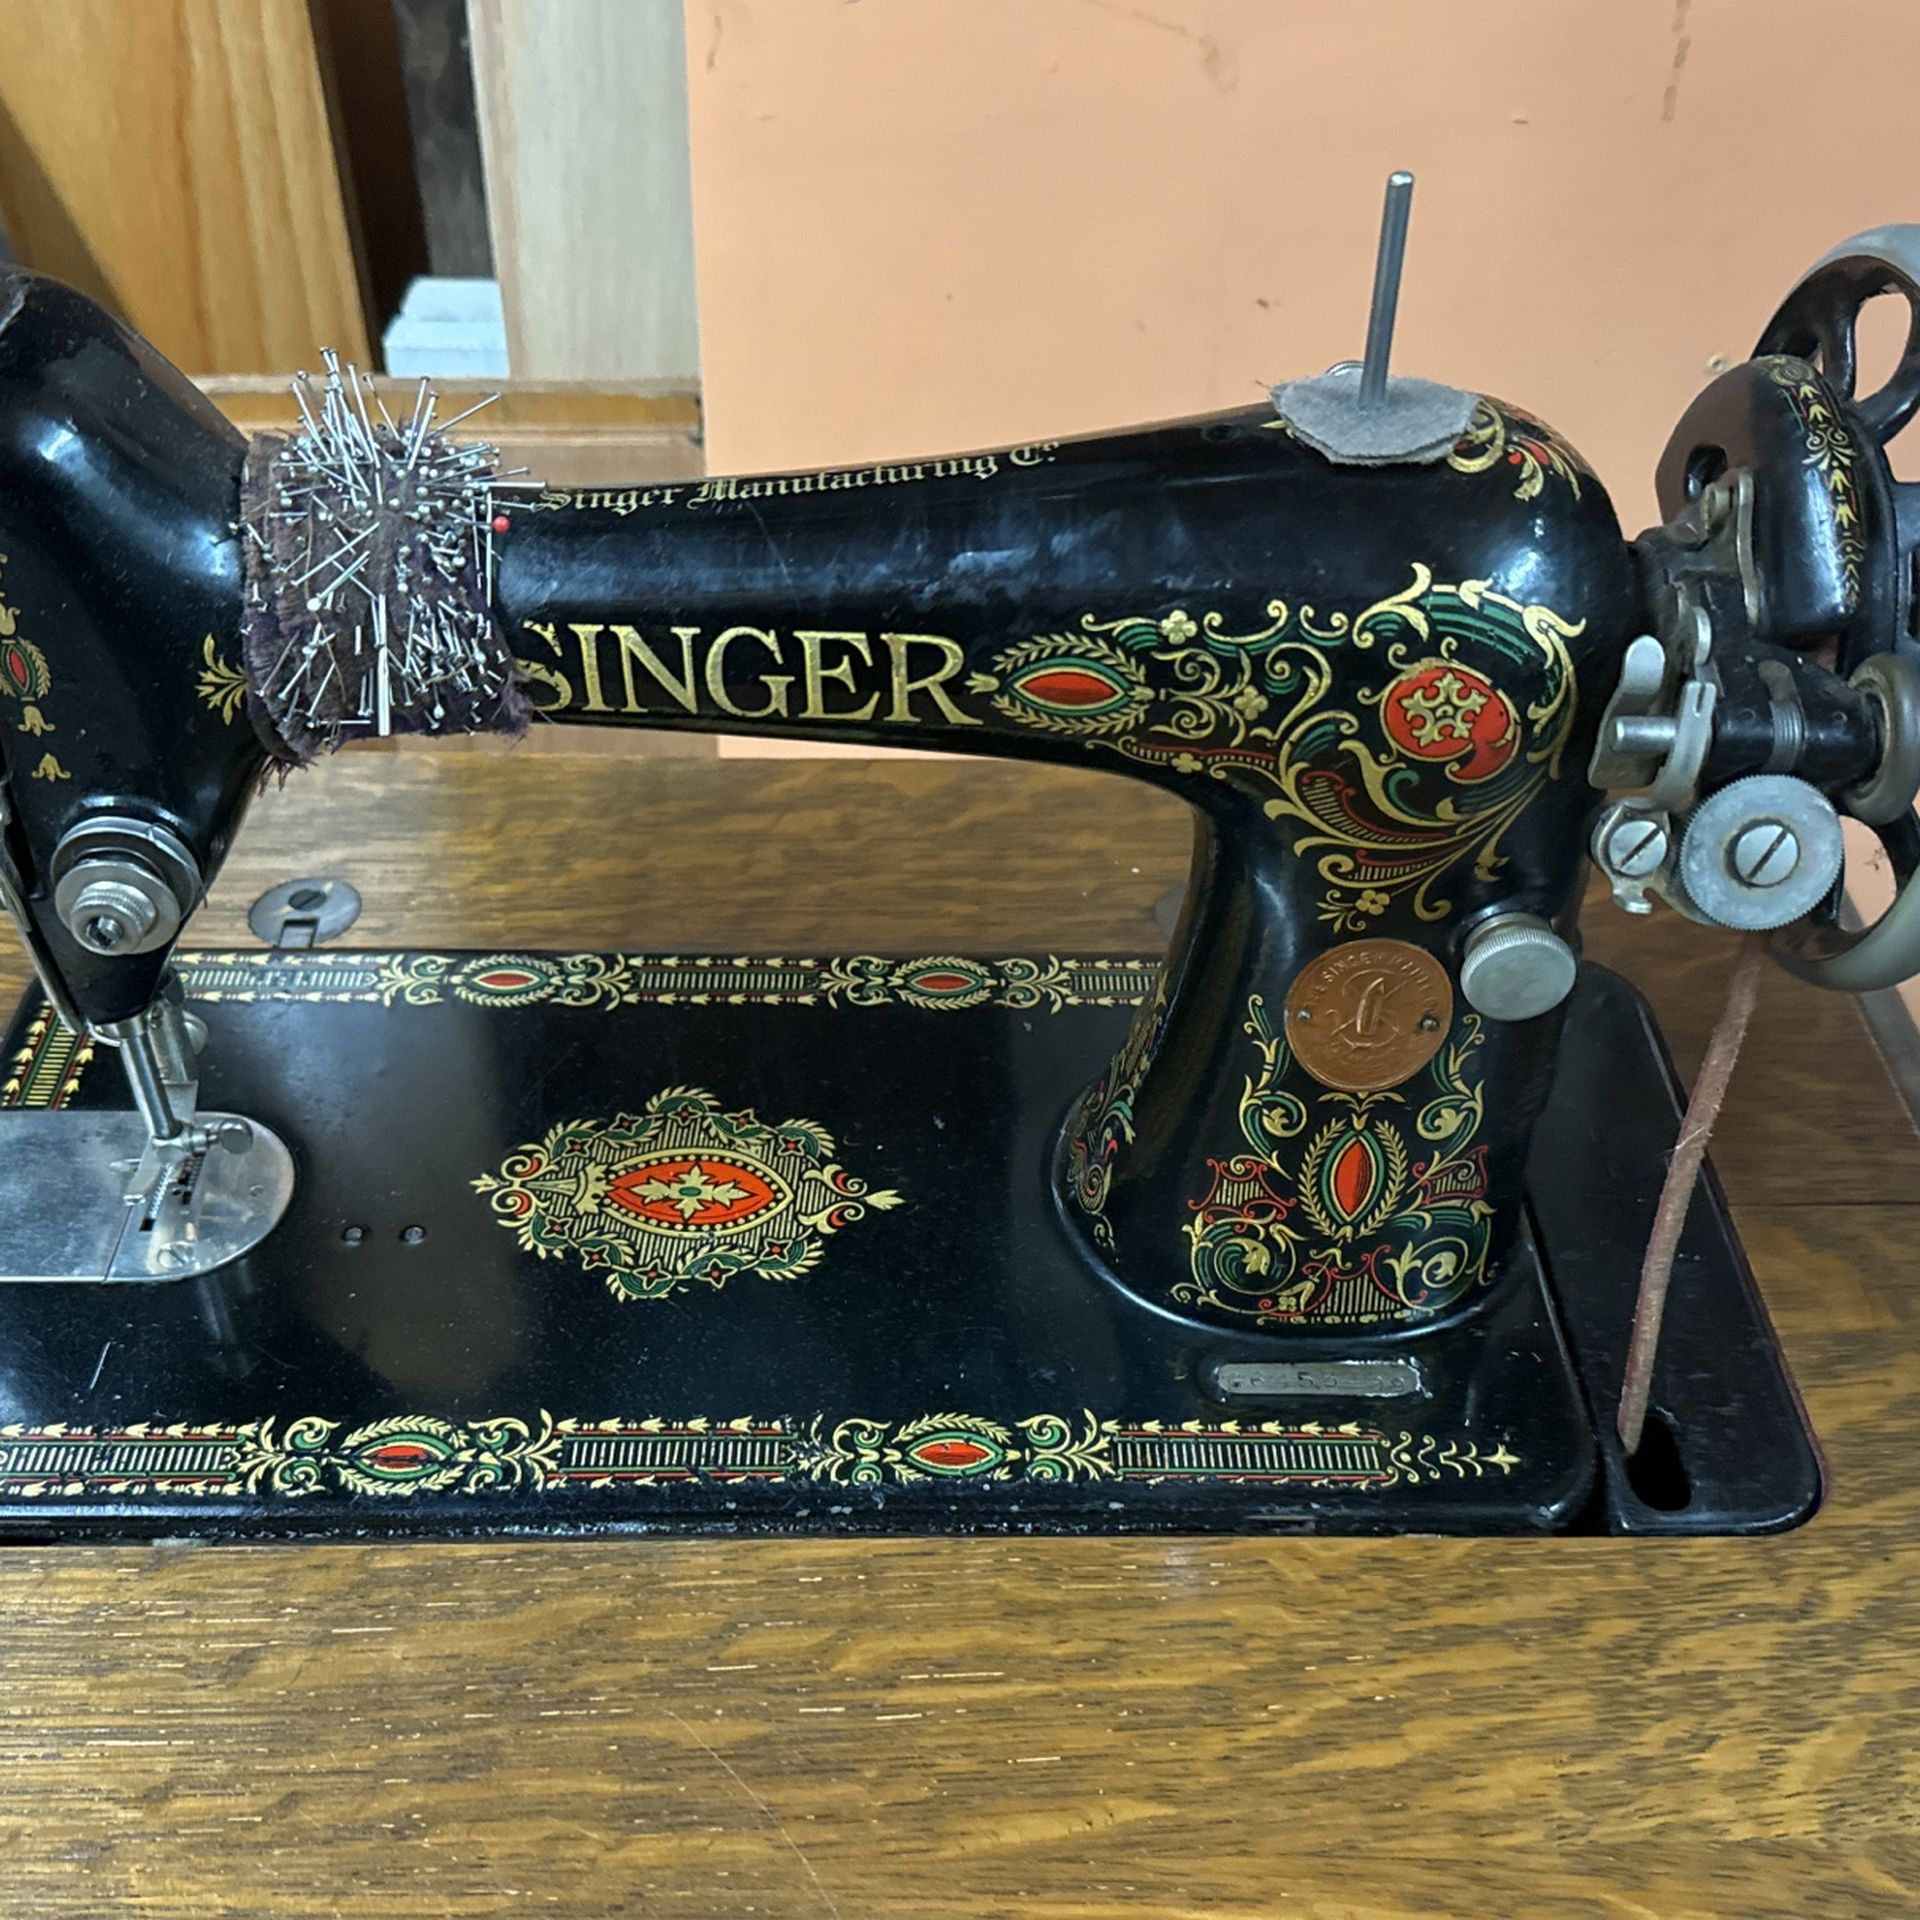 1910 Singer Model 15 With Type 23 Cabinet